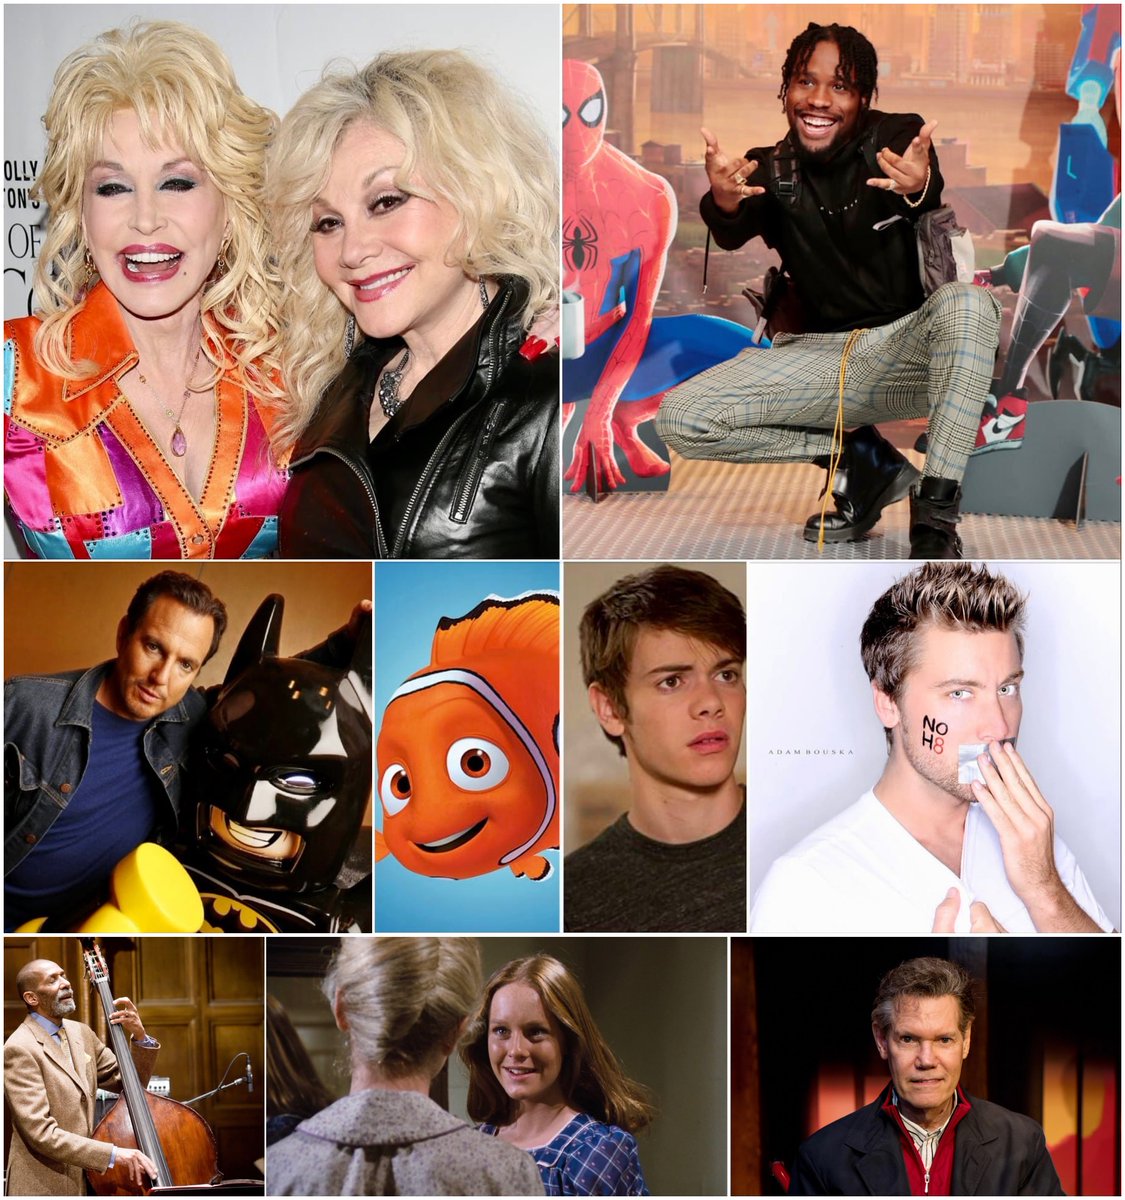 Wishing the happiest of birthdays to @StellaParton, @shameikmoore, @arnettwill, Alexander Gould, Lance Bass, @RonCarterBass, Mary McDonough, and @randytravis! 🎂❤️
#StellaParton #ShameikMoore #WillArnett #AlexanderGould #LanceBass #RonCarter #MaryMcDonough #RandyTravis #BOTD